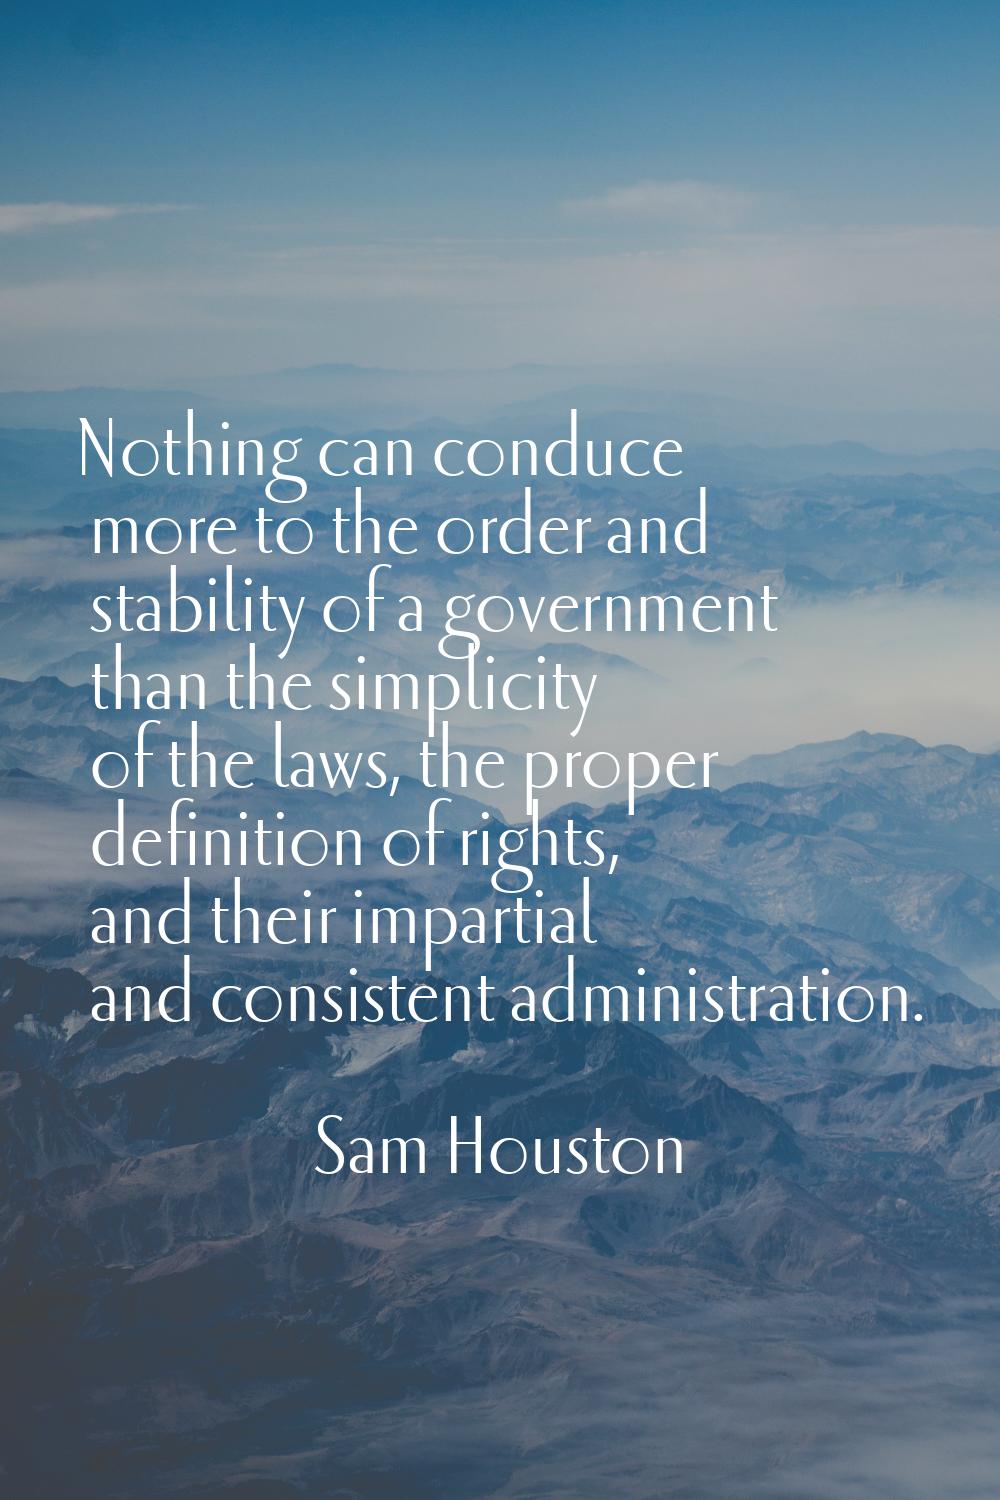 Nothing can conduce more to the order and stability of a government than the simplicity of the laws